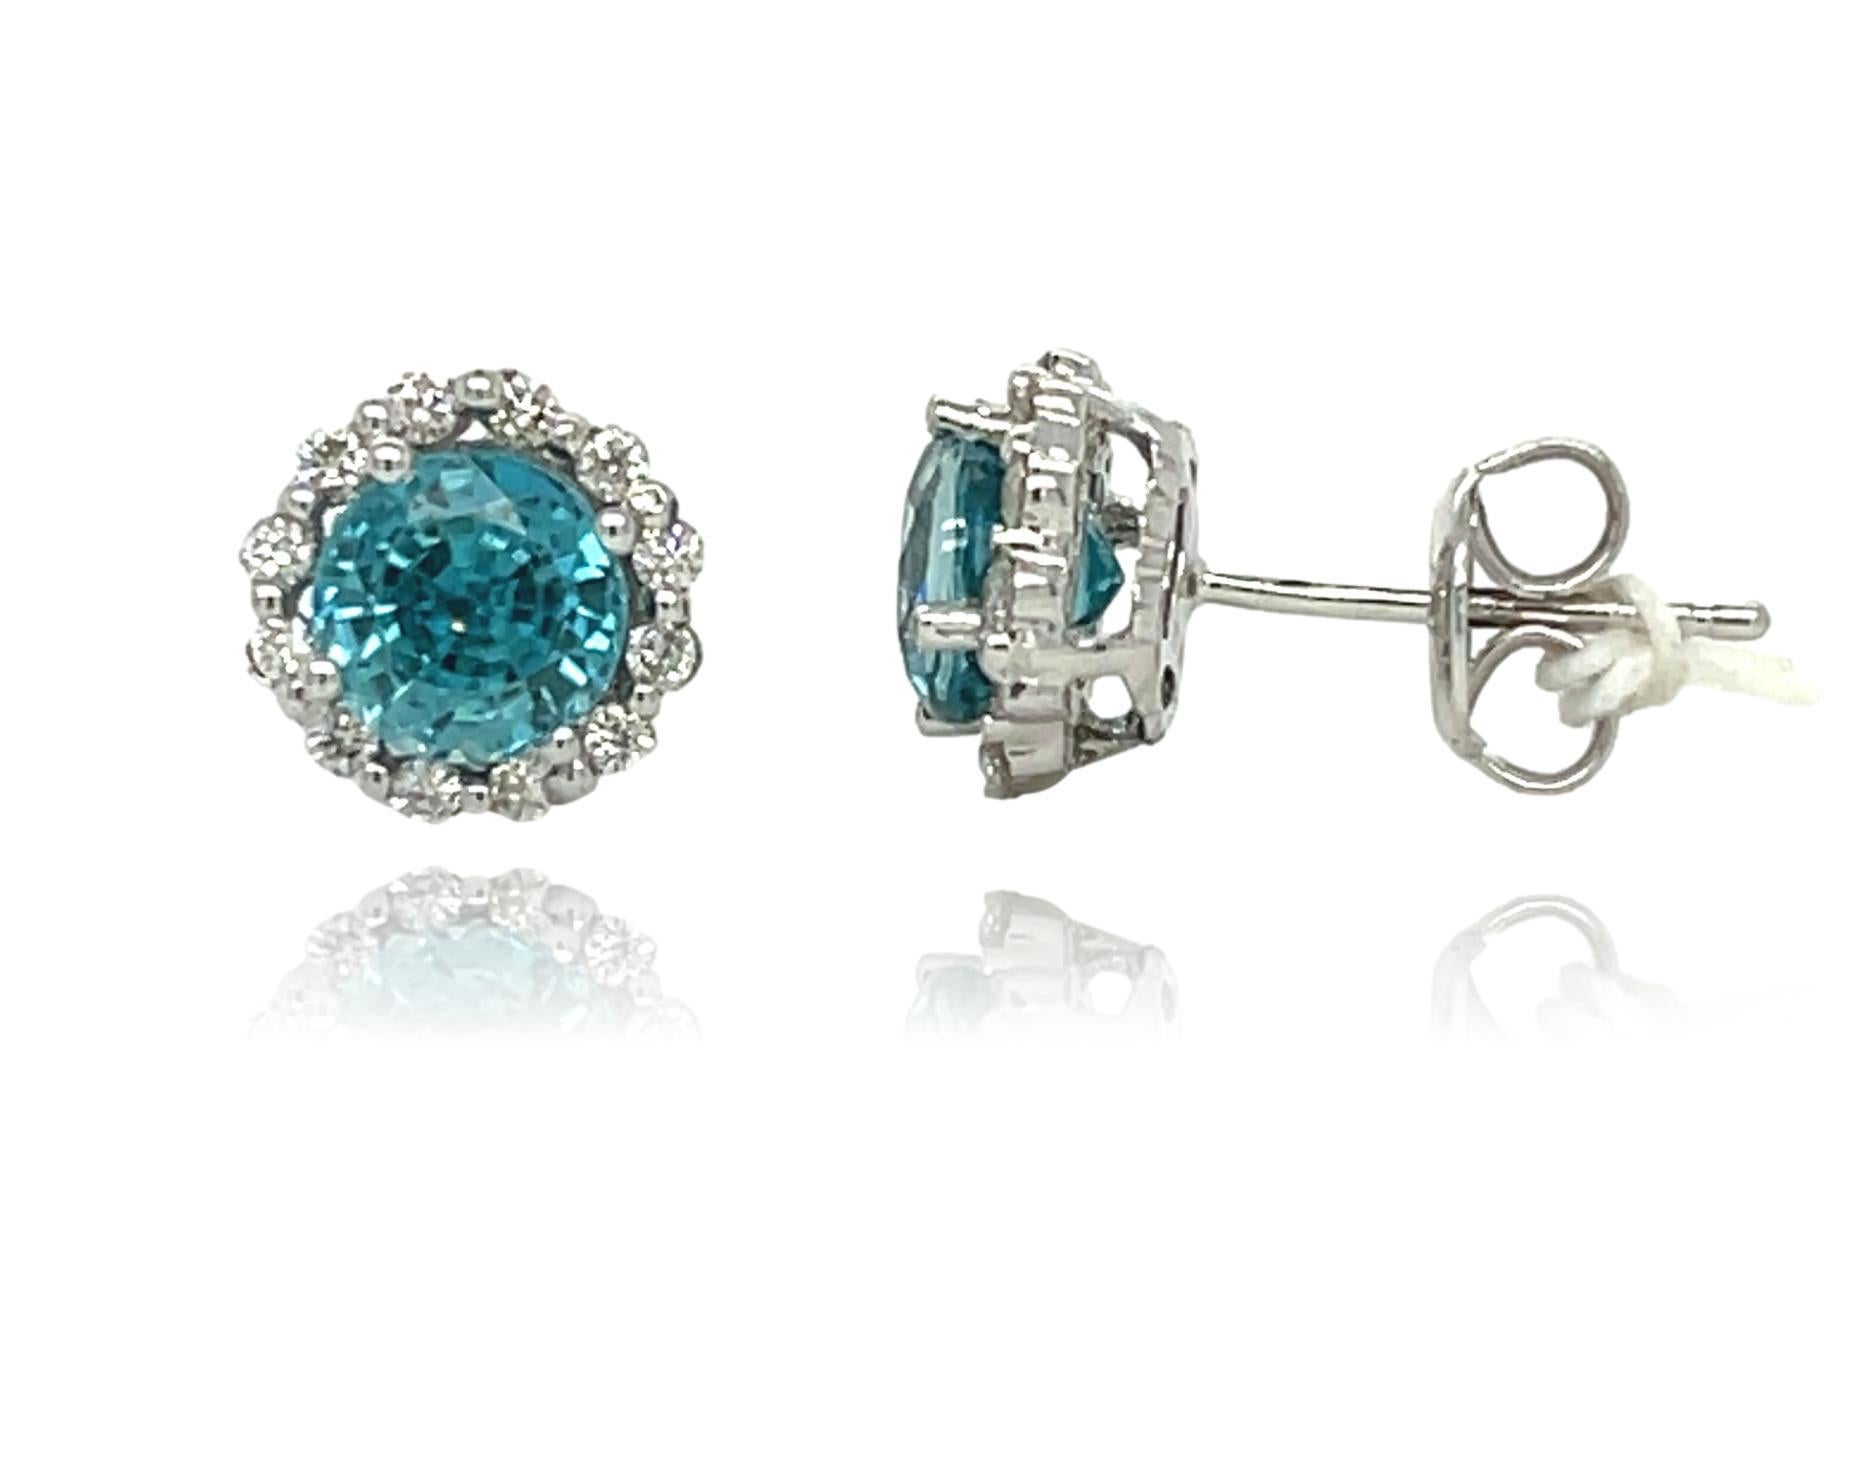 These elegant natural Blue Zircon stud earrings are surrounded by 24 sparkling diamonds and are beautiful to wear everyday. They have 4 prong setting in 18 karat white gold. It is brand new with detailed tags attached. These earrings come in a